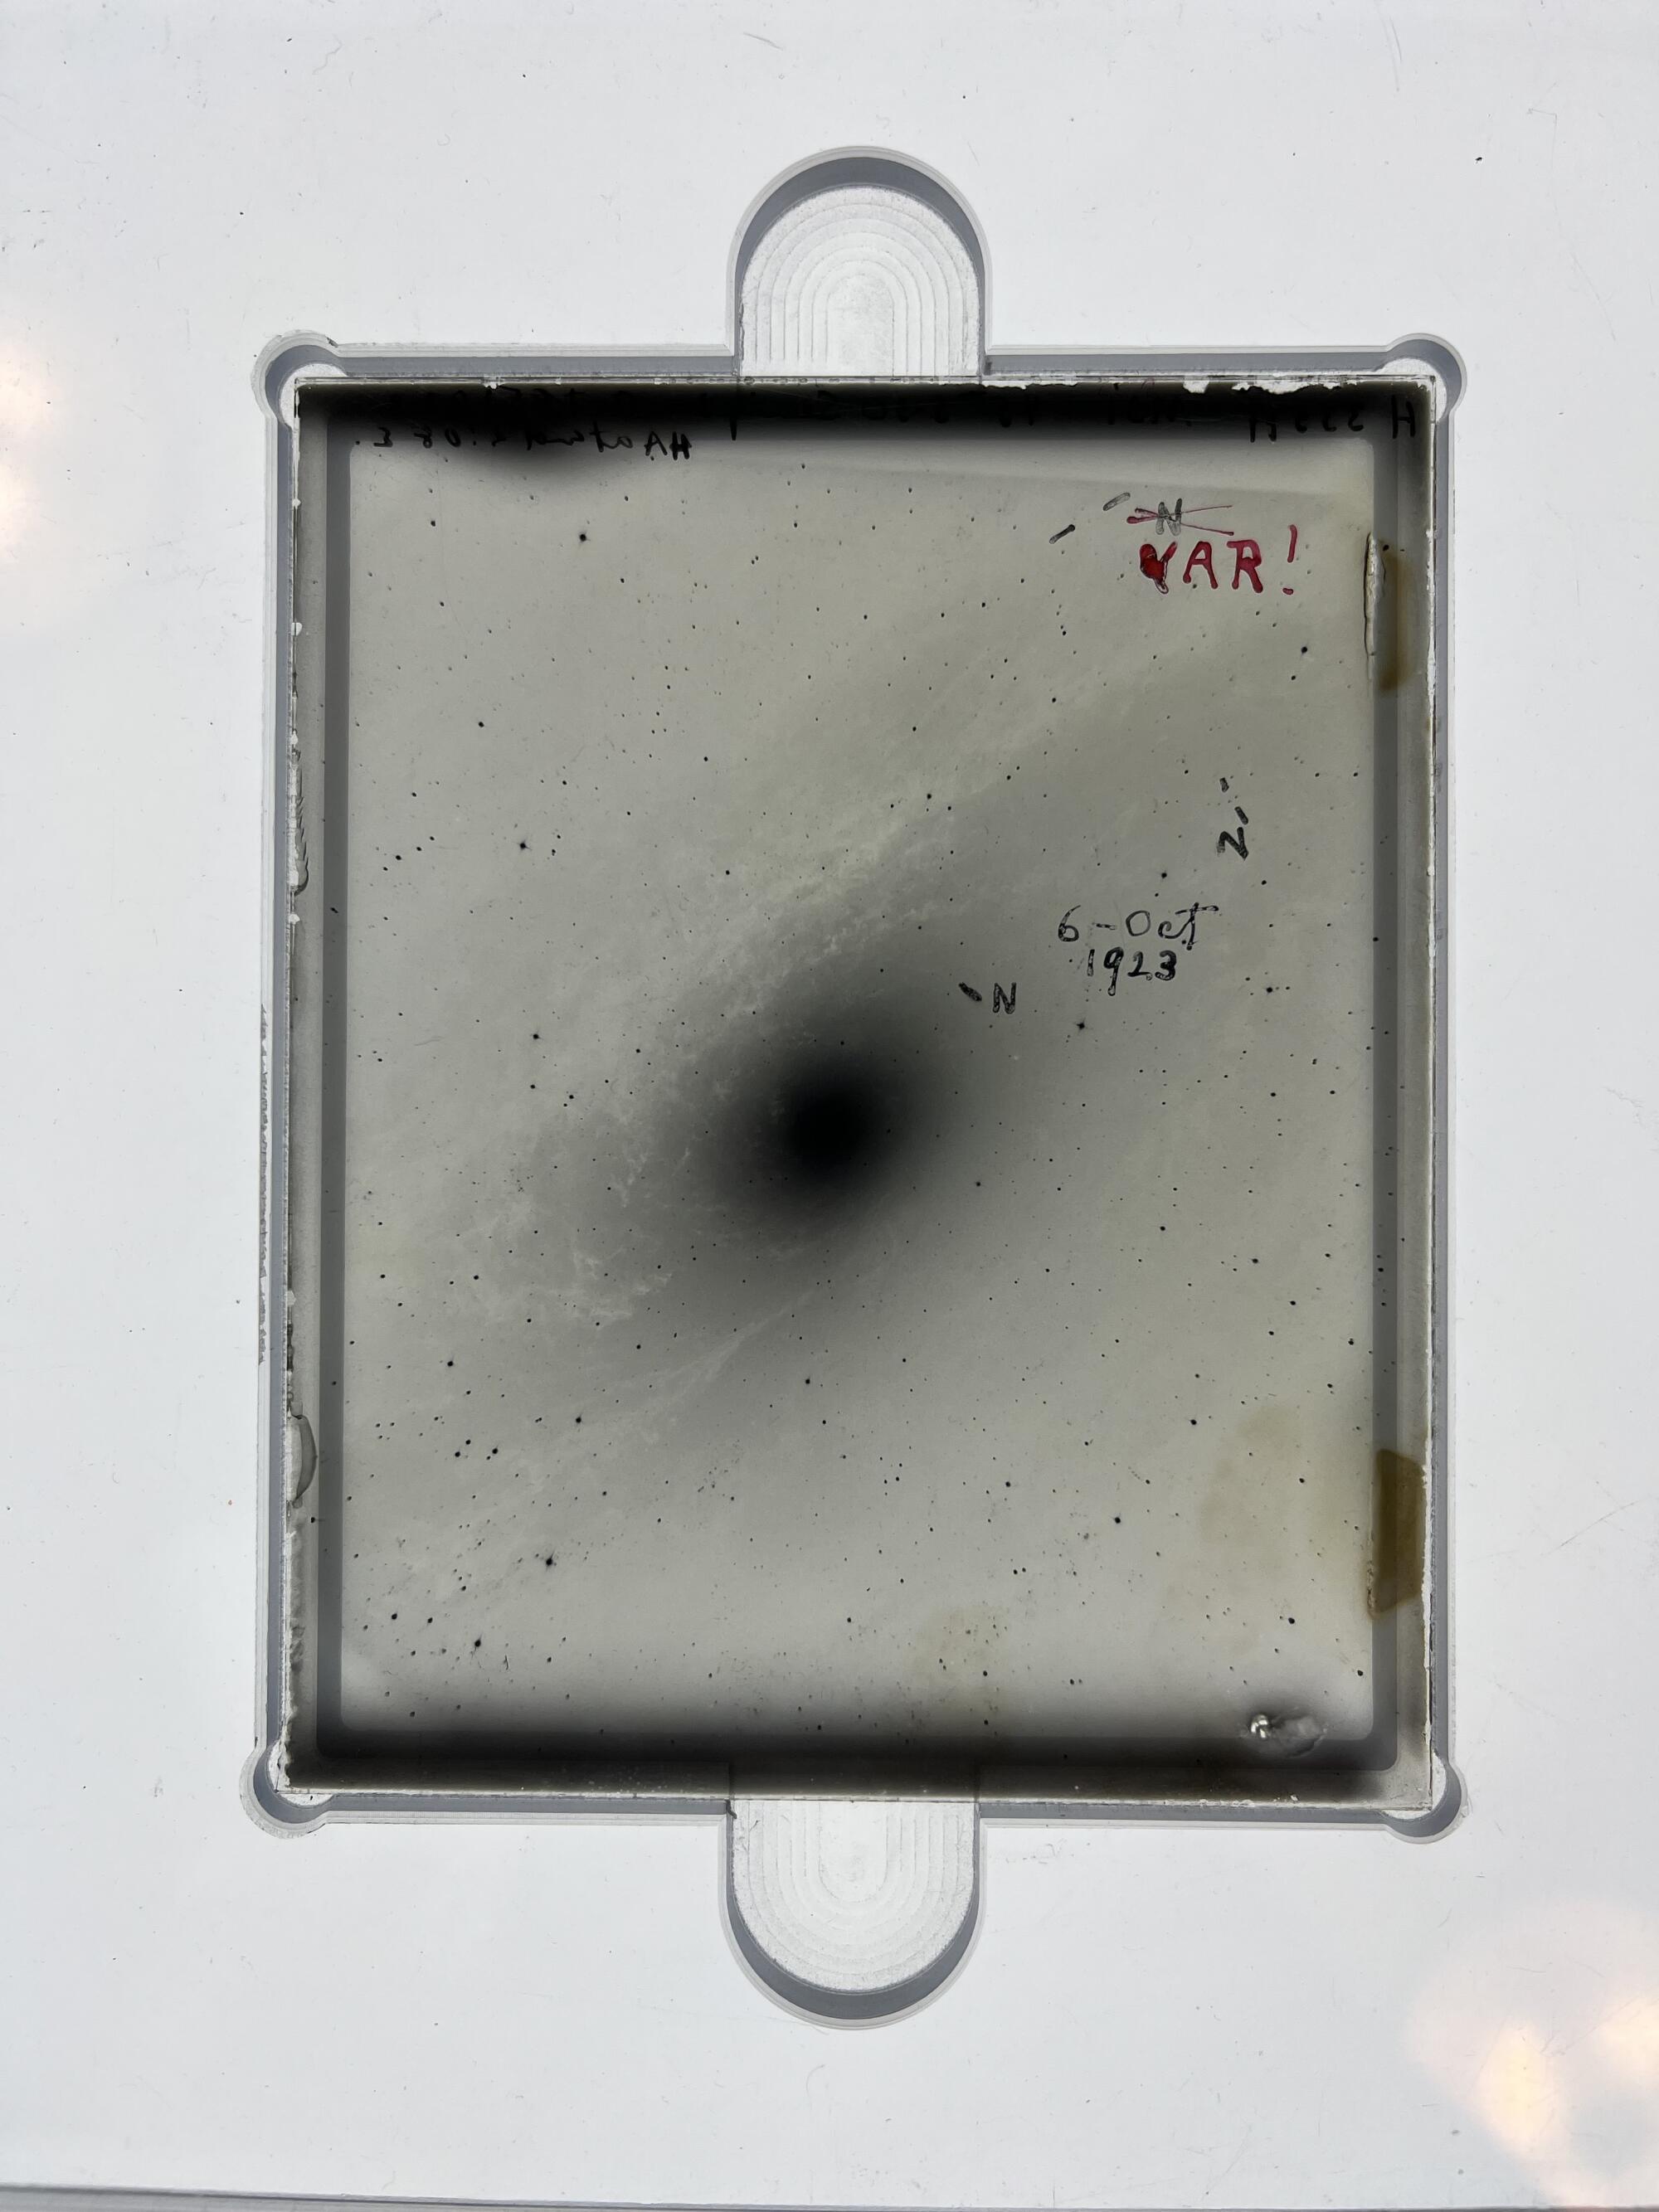 The glass plate with an image of Andromeda and led Edwin Hubble to conclude that the universe extended beyond our galaxy.